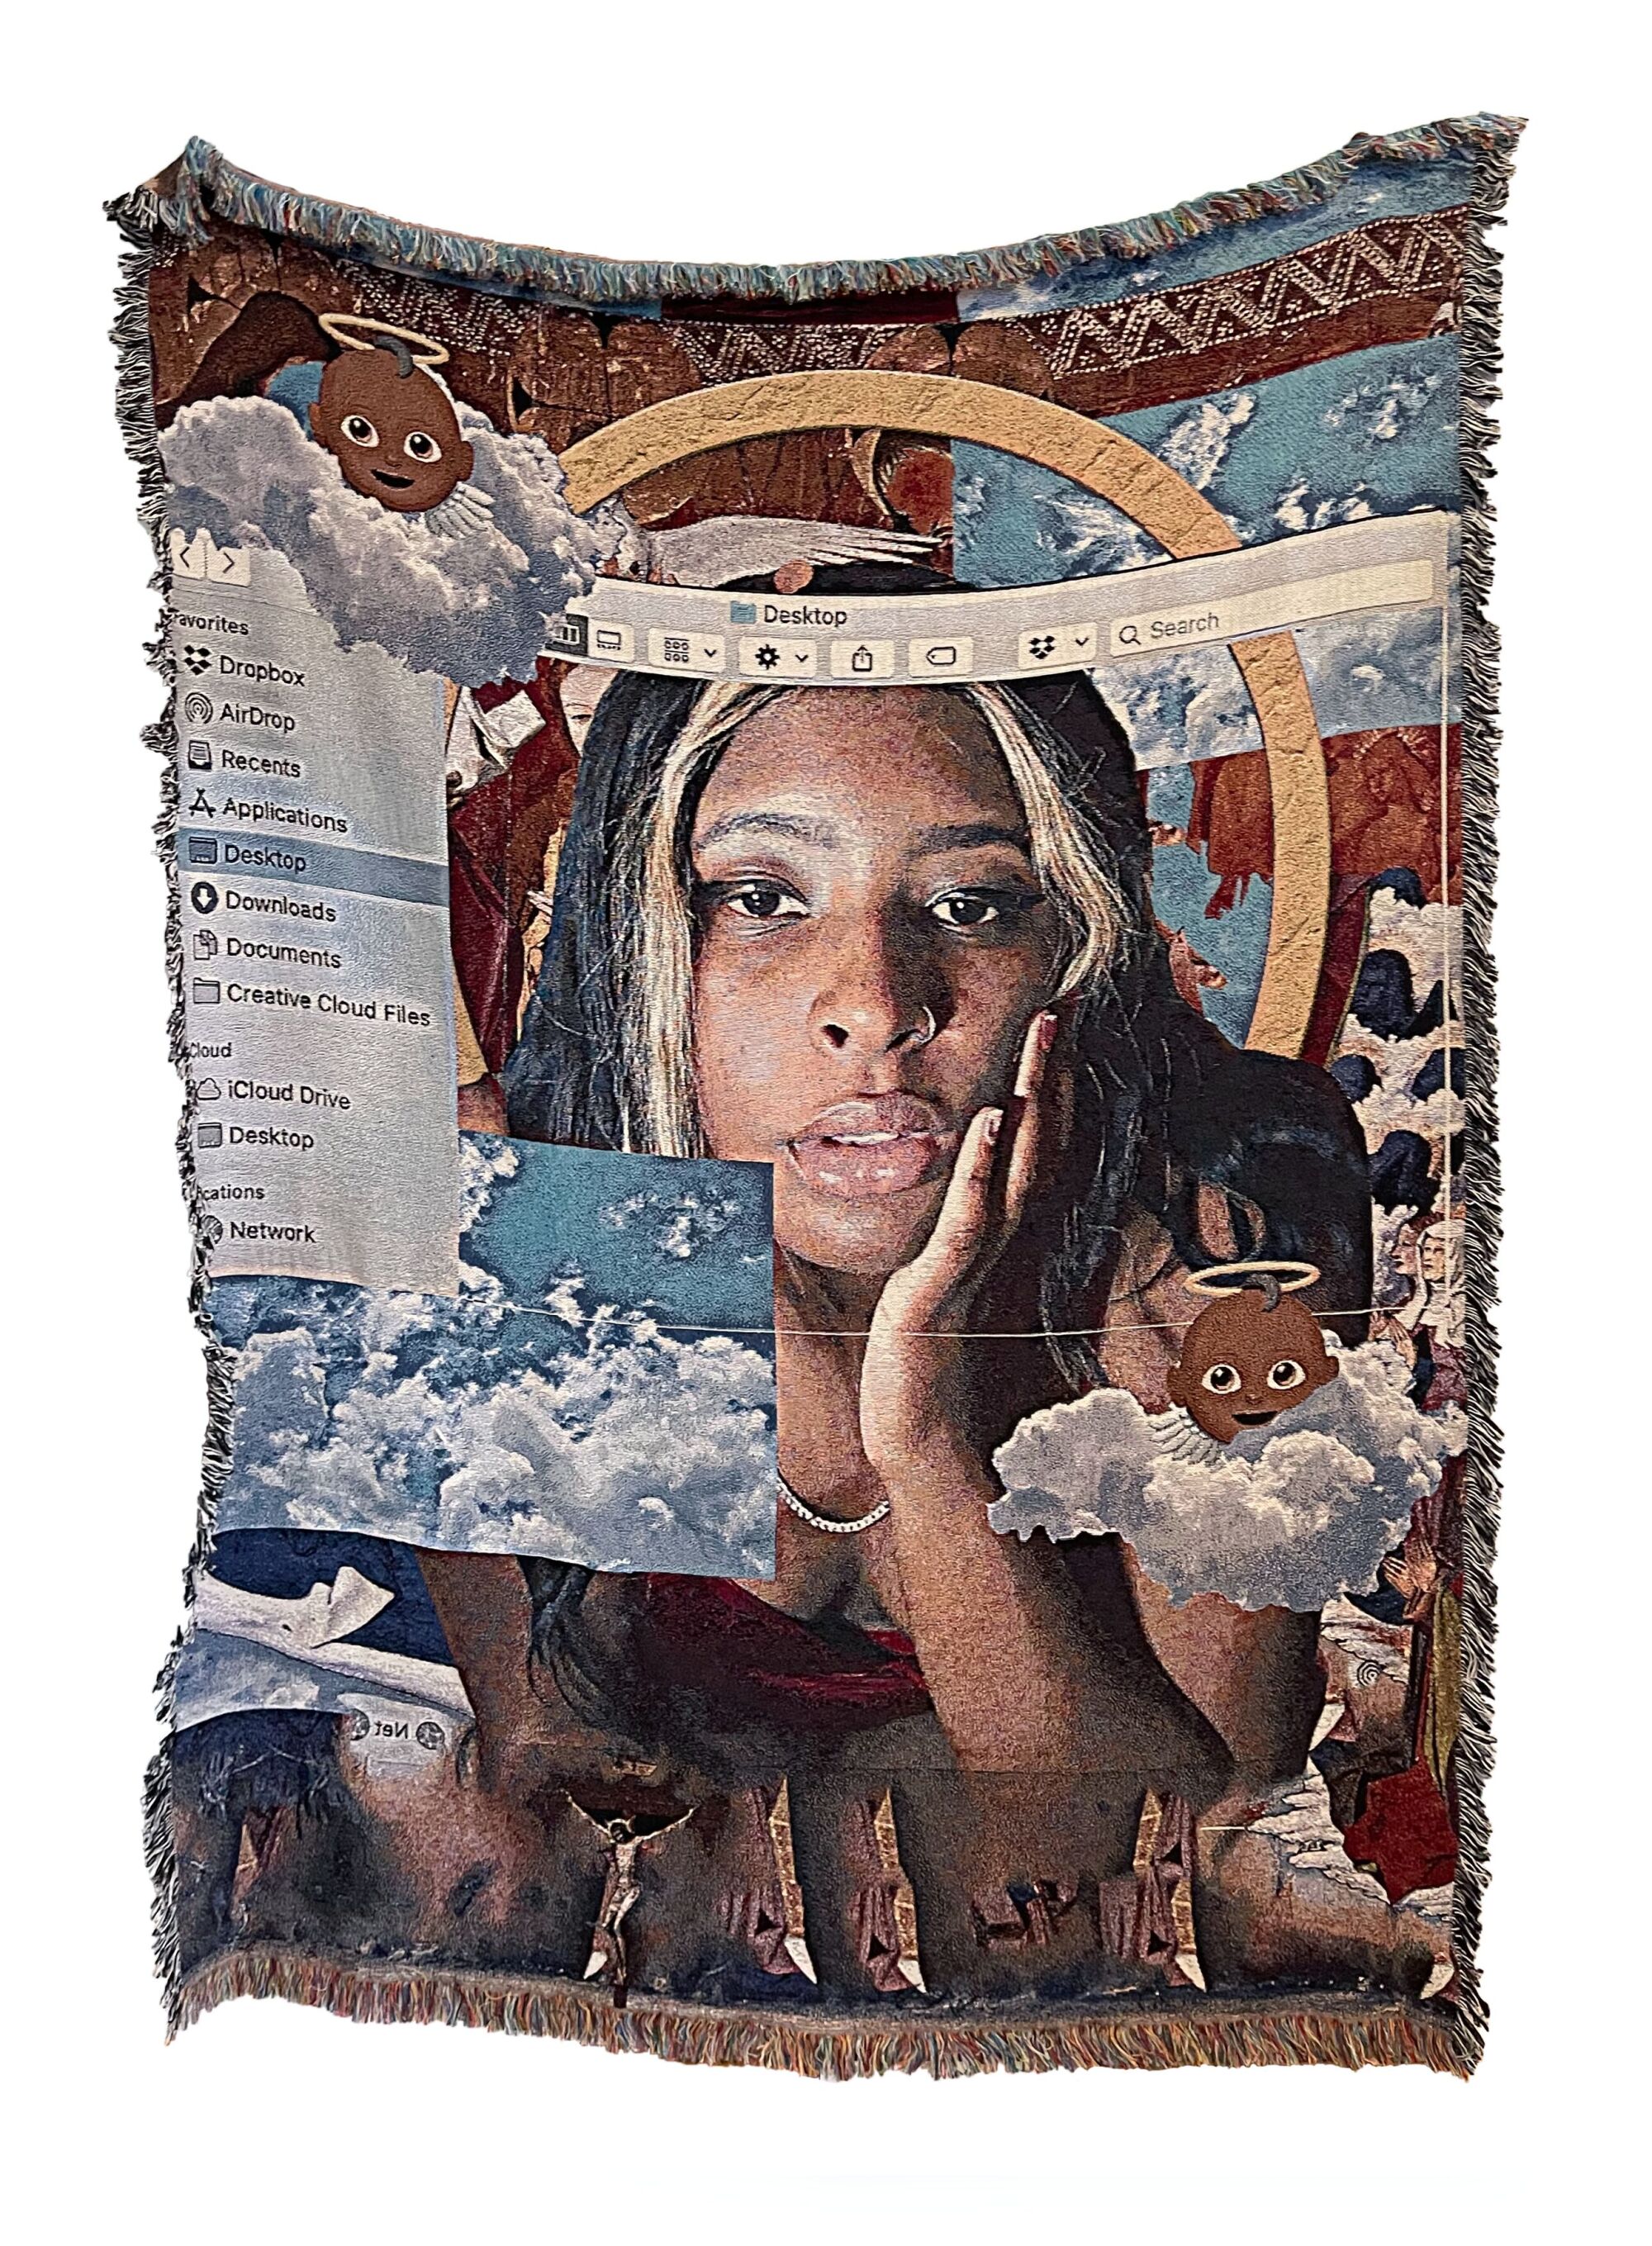 A blanket printed with images of a woman's face, baby angel emojis and a computer screen